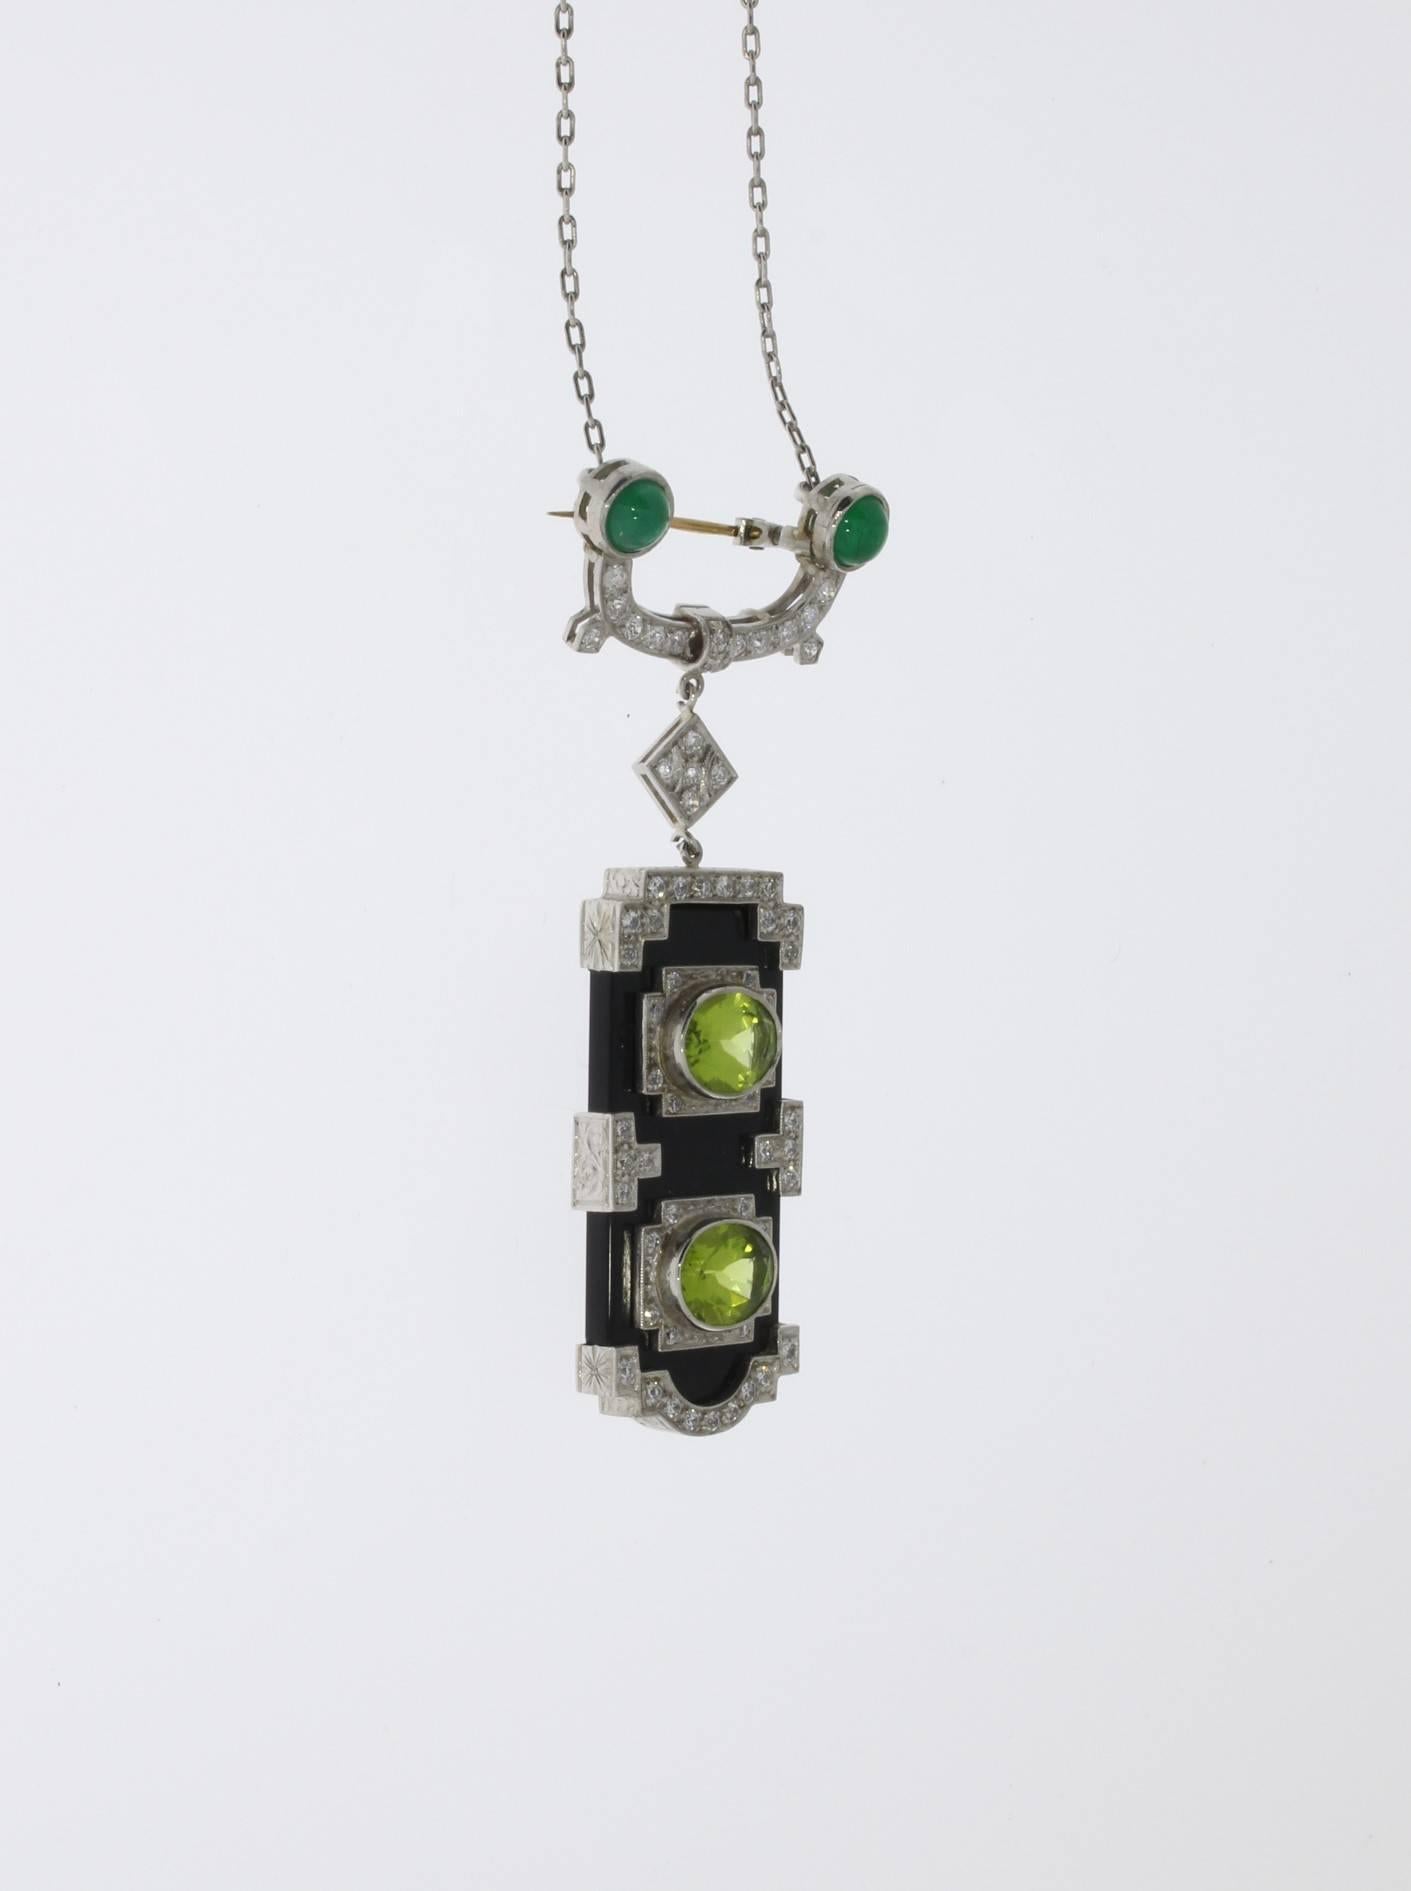 This platinum pendant necklace is a beautiful example of jewelry.
Composed of an onyx plate and adorned with two oval-cut peridots weighing approximately 7 ct. Geometrically arranged with 64 brilliant-cut diamonds weighing 0,90 ct. Top on the